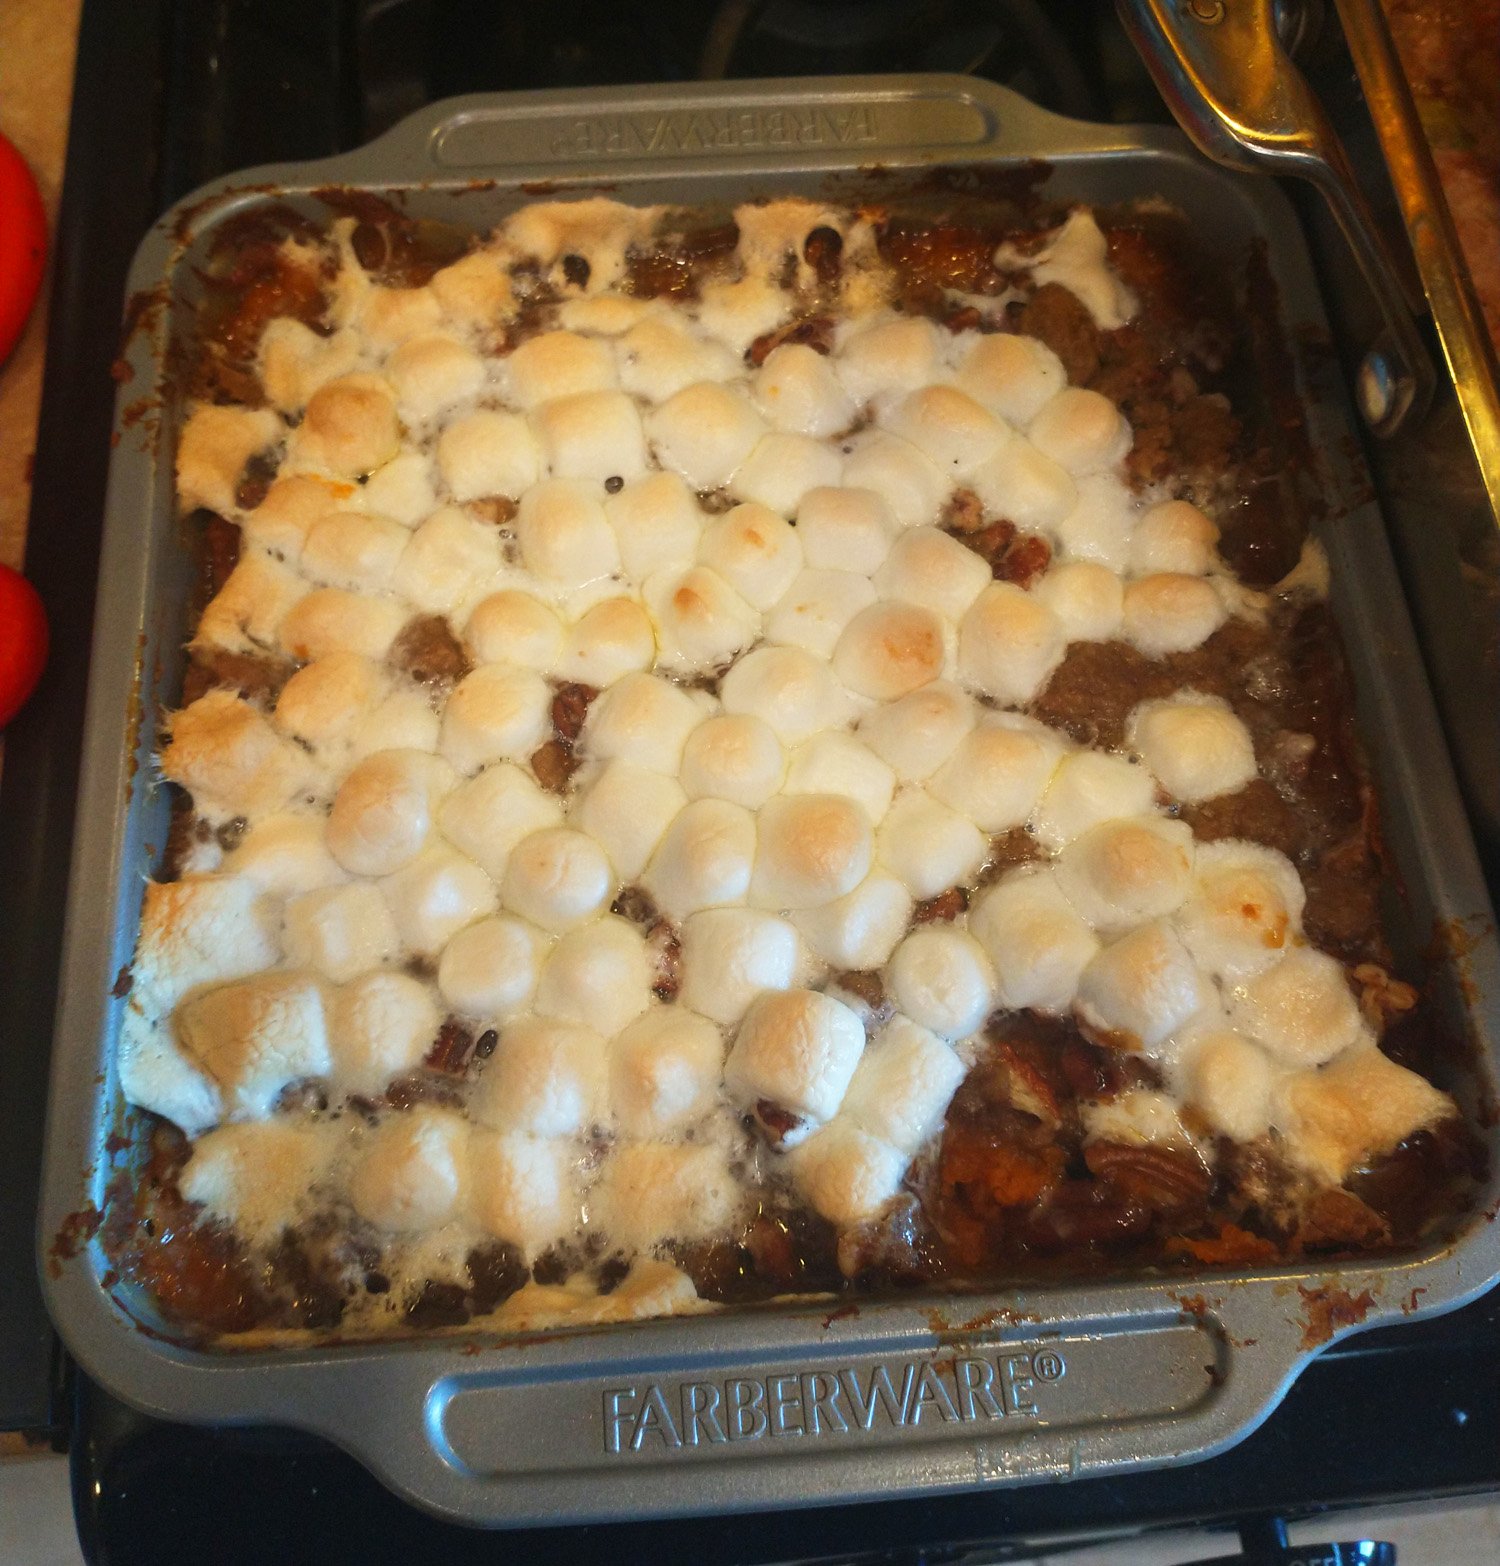 Stayed until Thanksgiving! Made this sweet potato casserole. Very delicious diabetes goo.